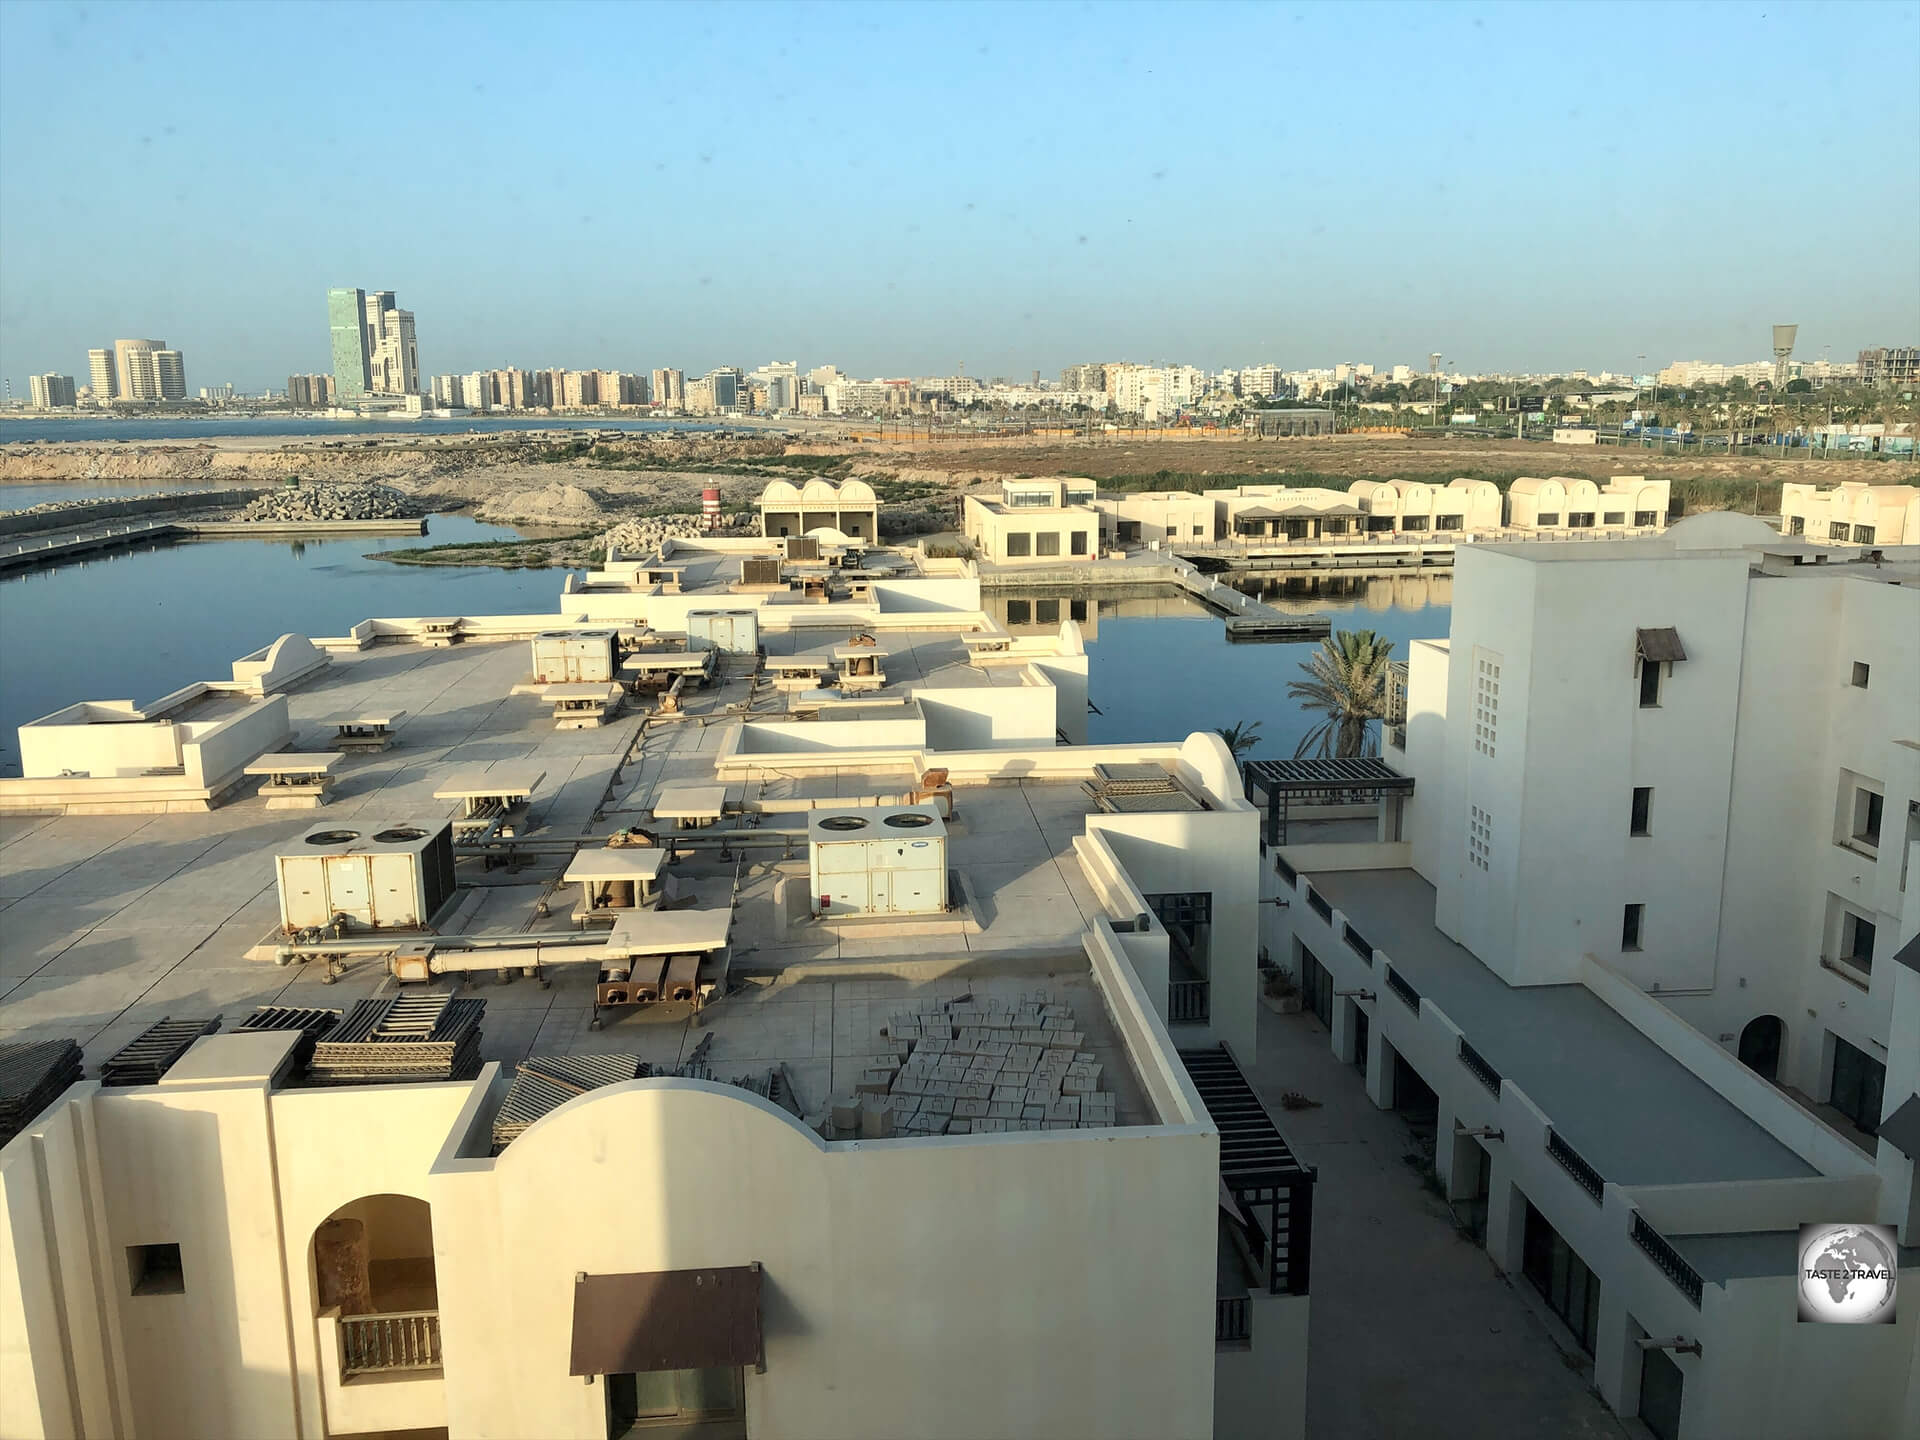 A view of the abandoned Sheraton marina and luxury villas complex.  